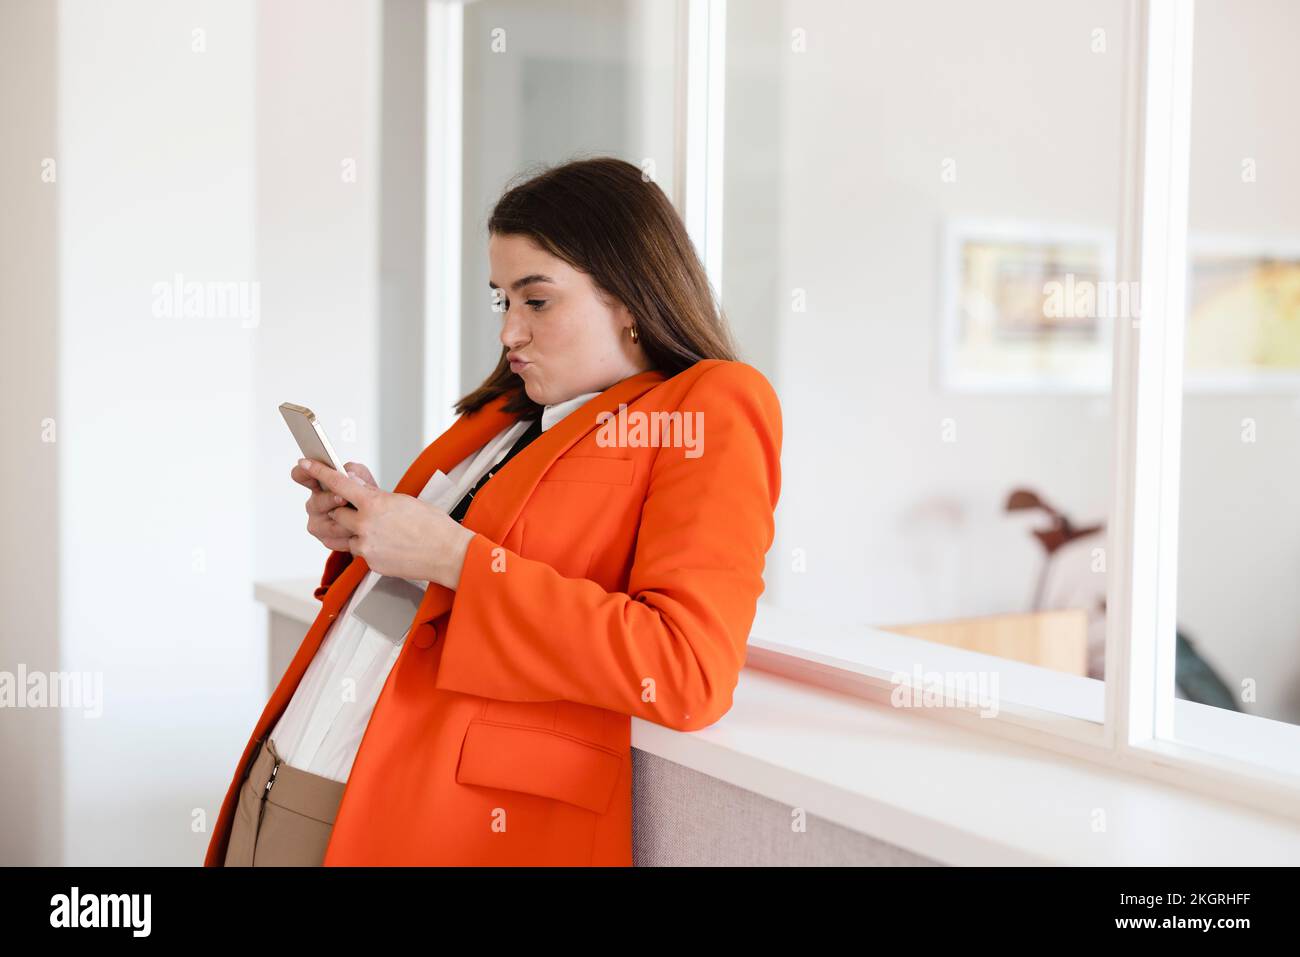 Businesswoman using smart phone leaning on cabinet in office Stock Photo